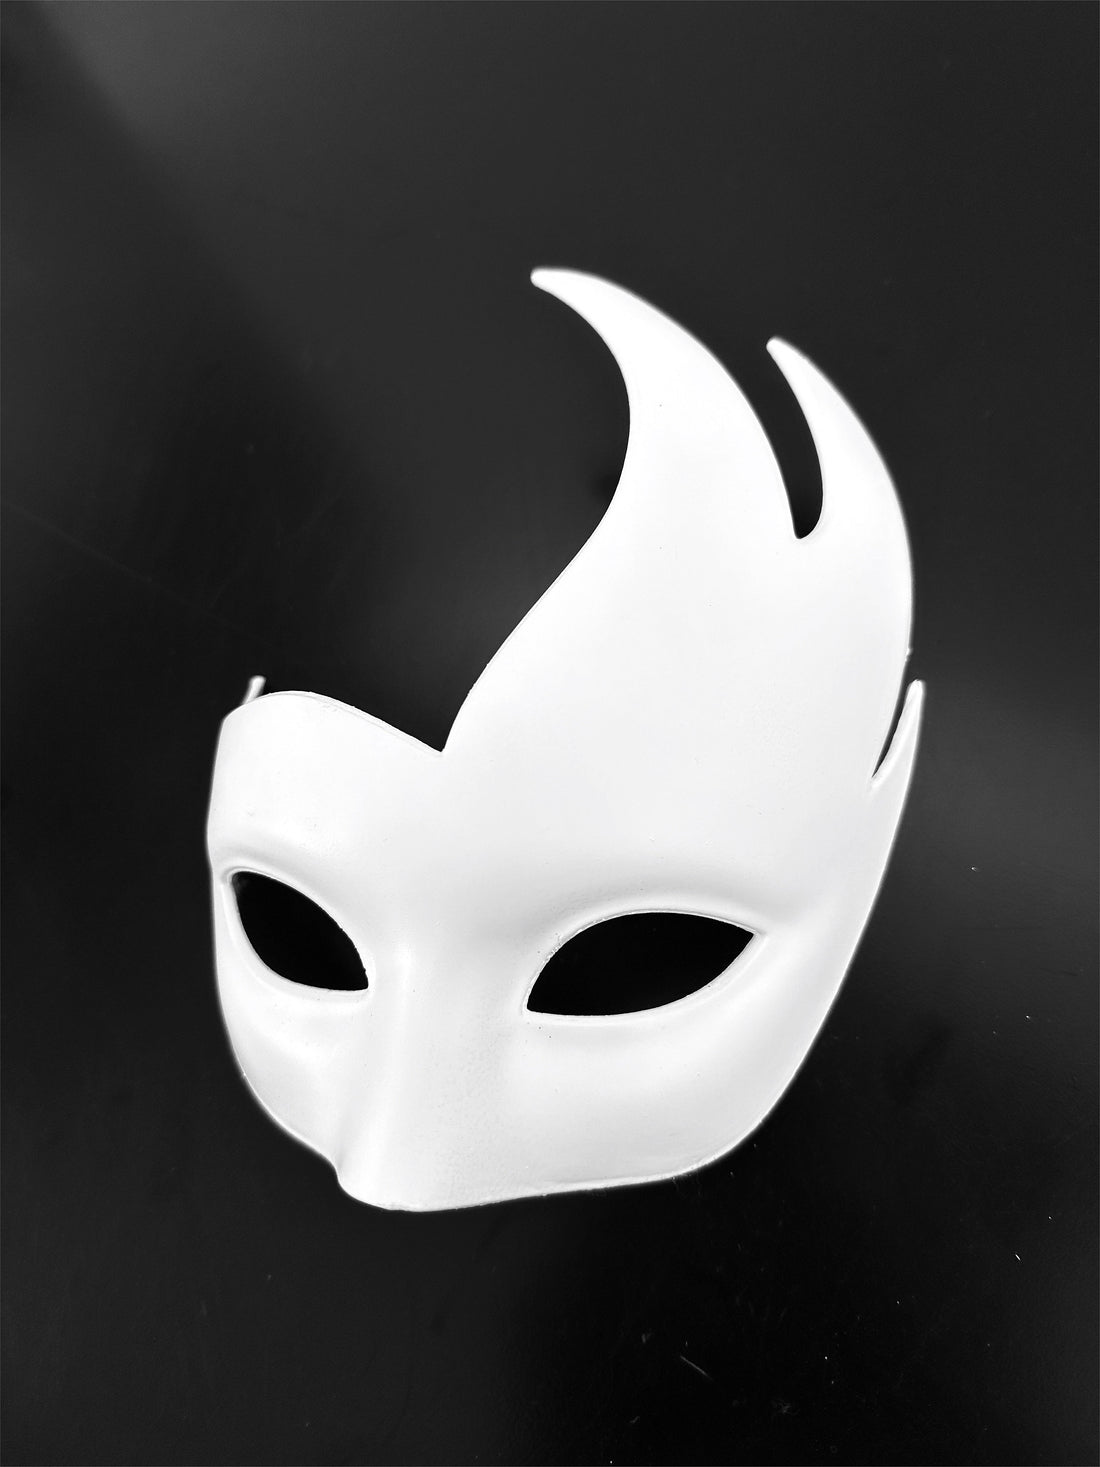 Amscan Mystical Masquerade Party Basic Full Face Mask (1 Piece), White, 8 x 5.5